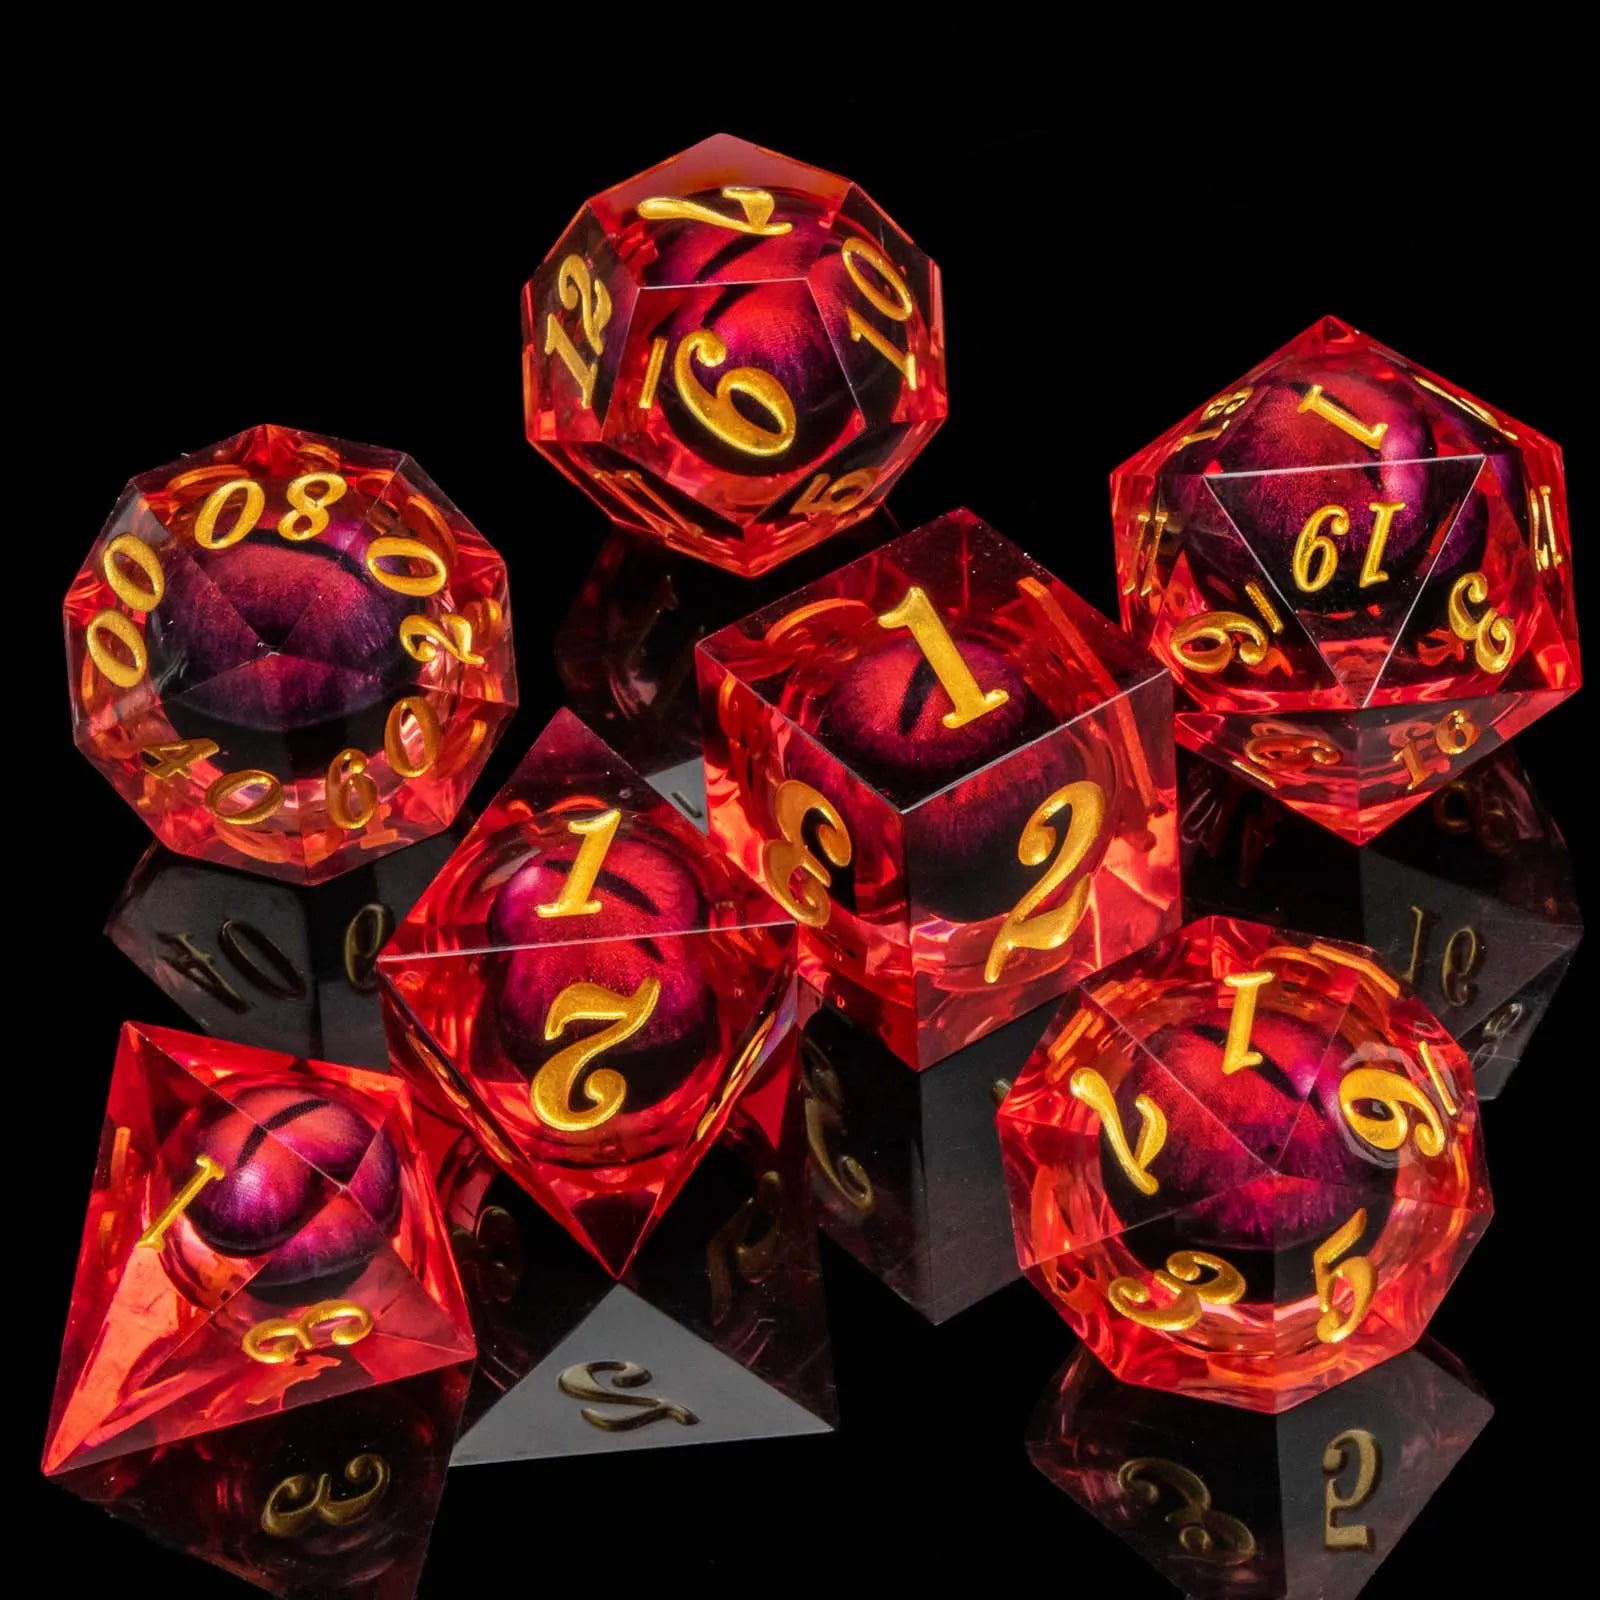 DND Eye Liquid Flow Core Resin D&D Dice Set For D and D Dungeon and Dragon Pathfinder Table Role Playing Game Polyhedral Dice AZ07